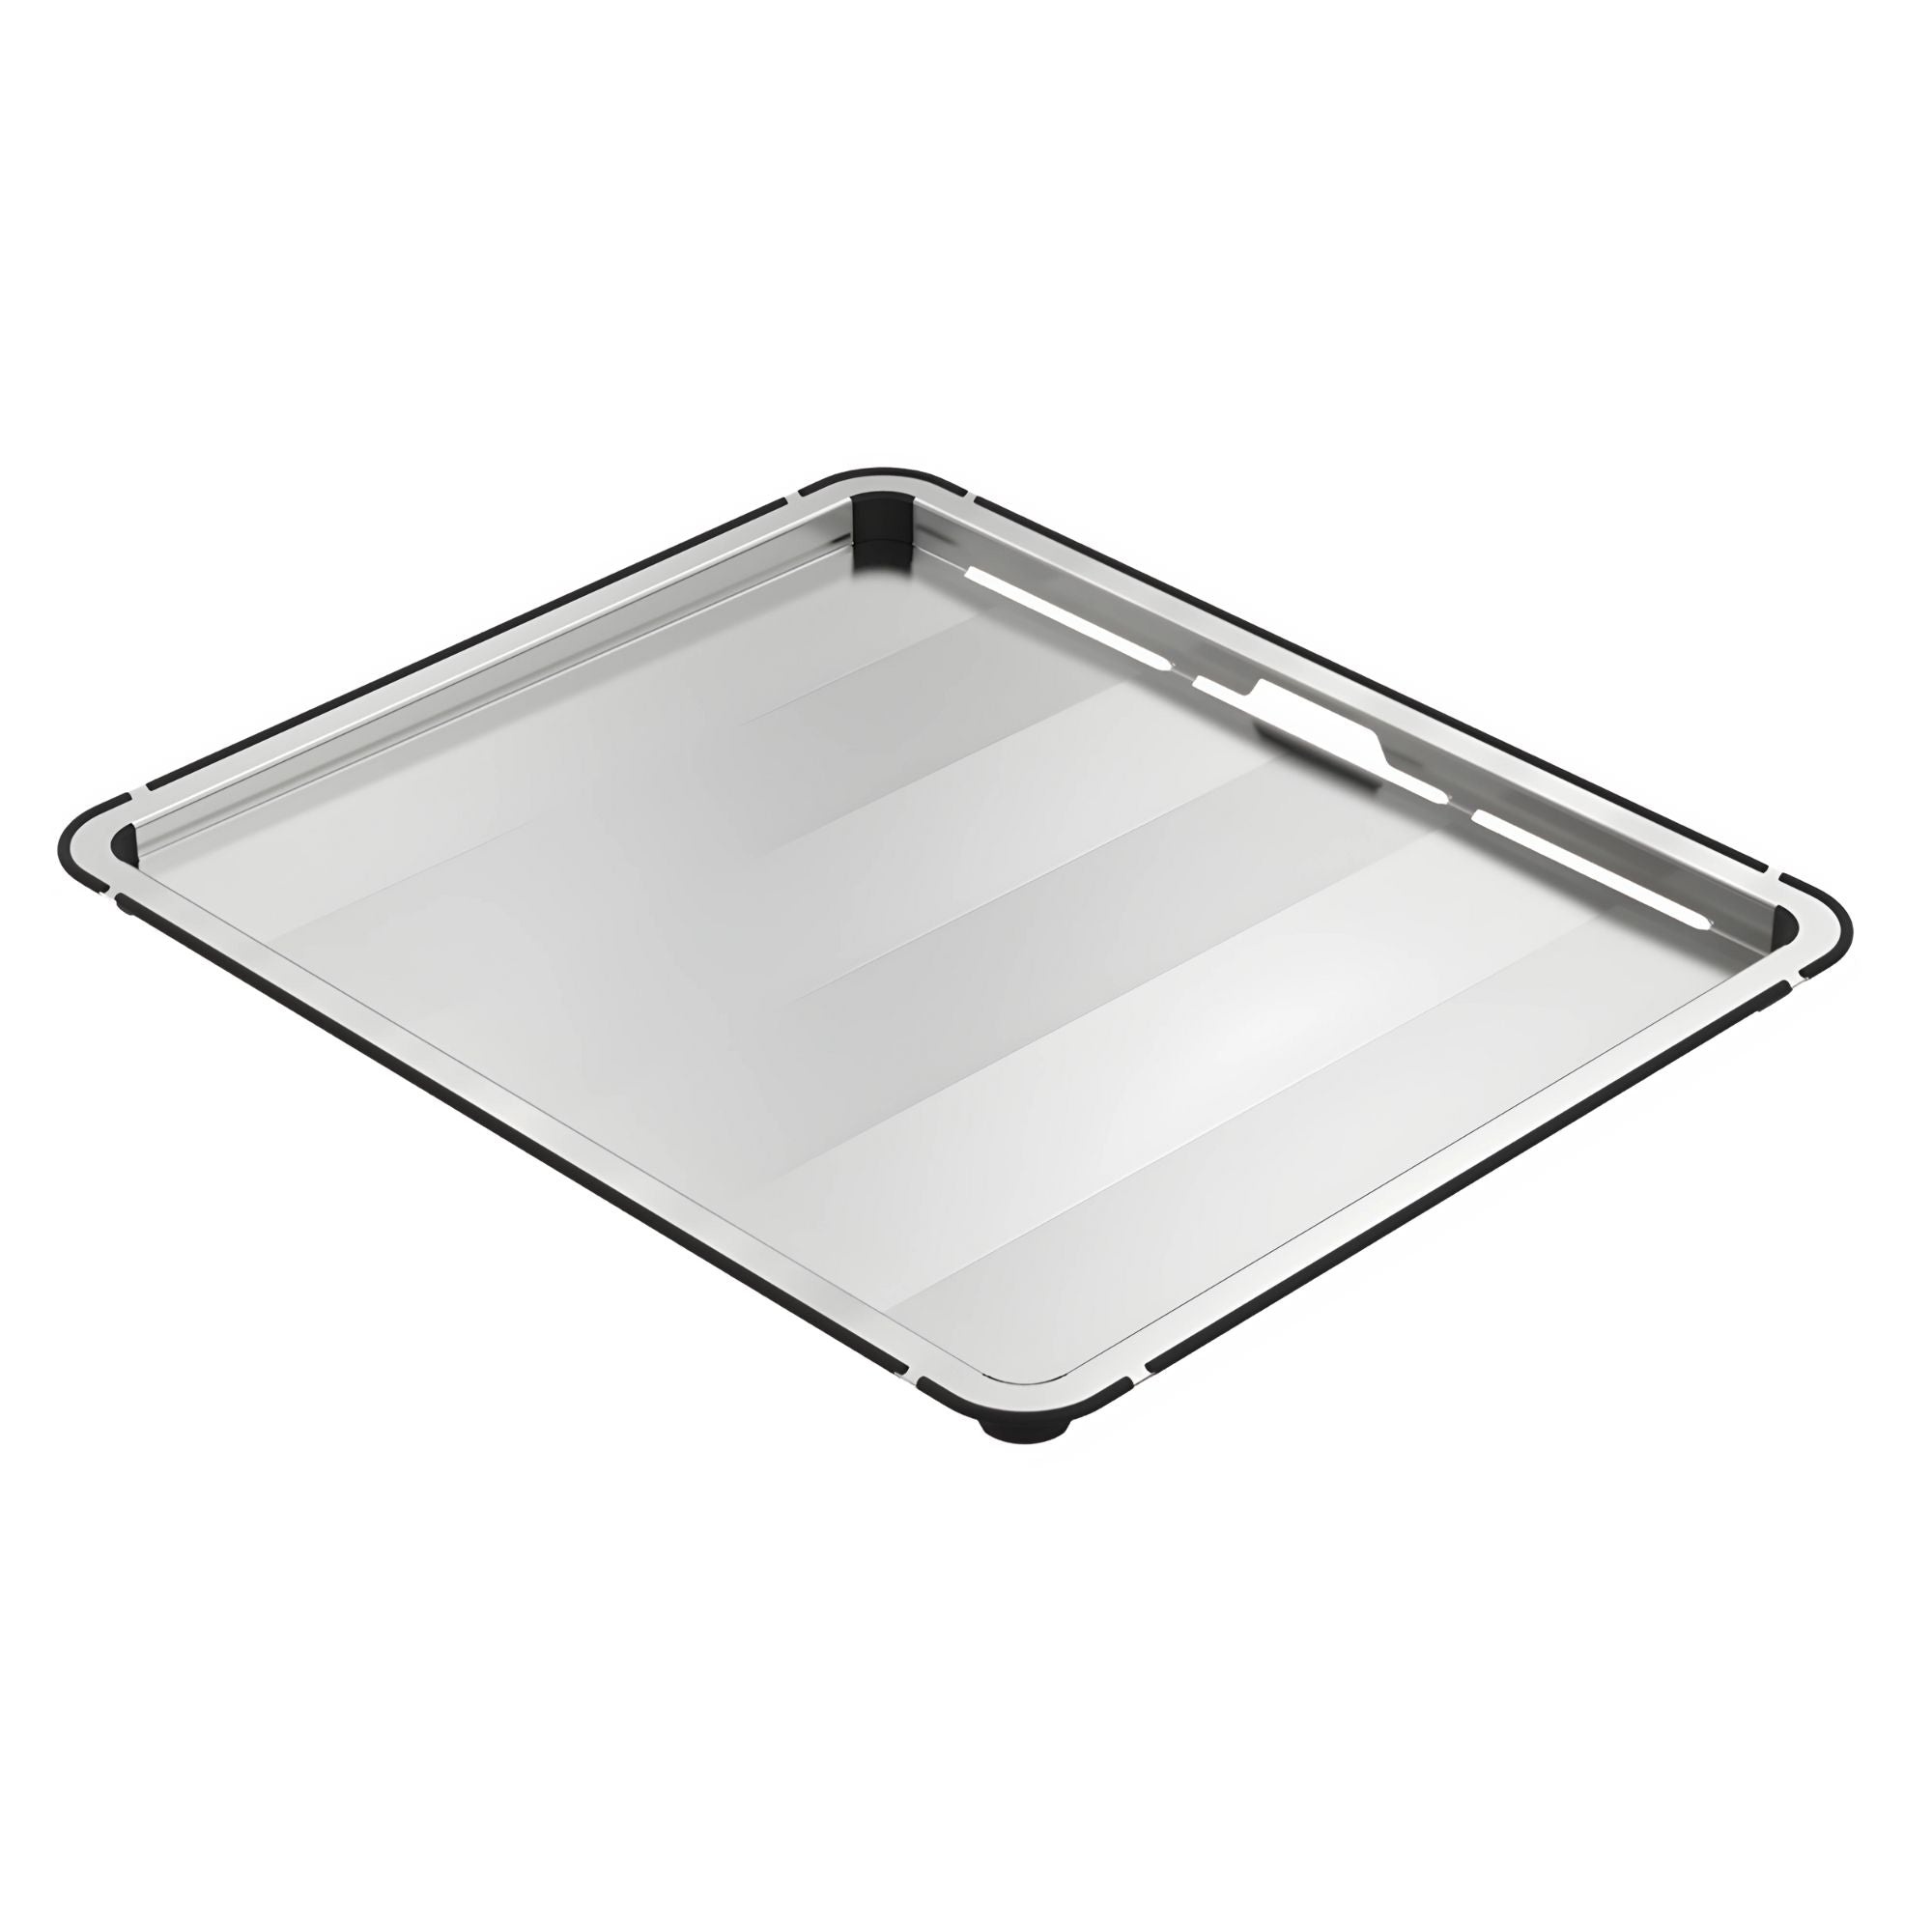 ABEY LUCIA LARGE SINGLE BOWL KITCHEN SINK STAINLESS STEEL 540MM